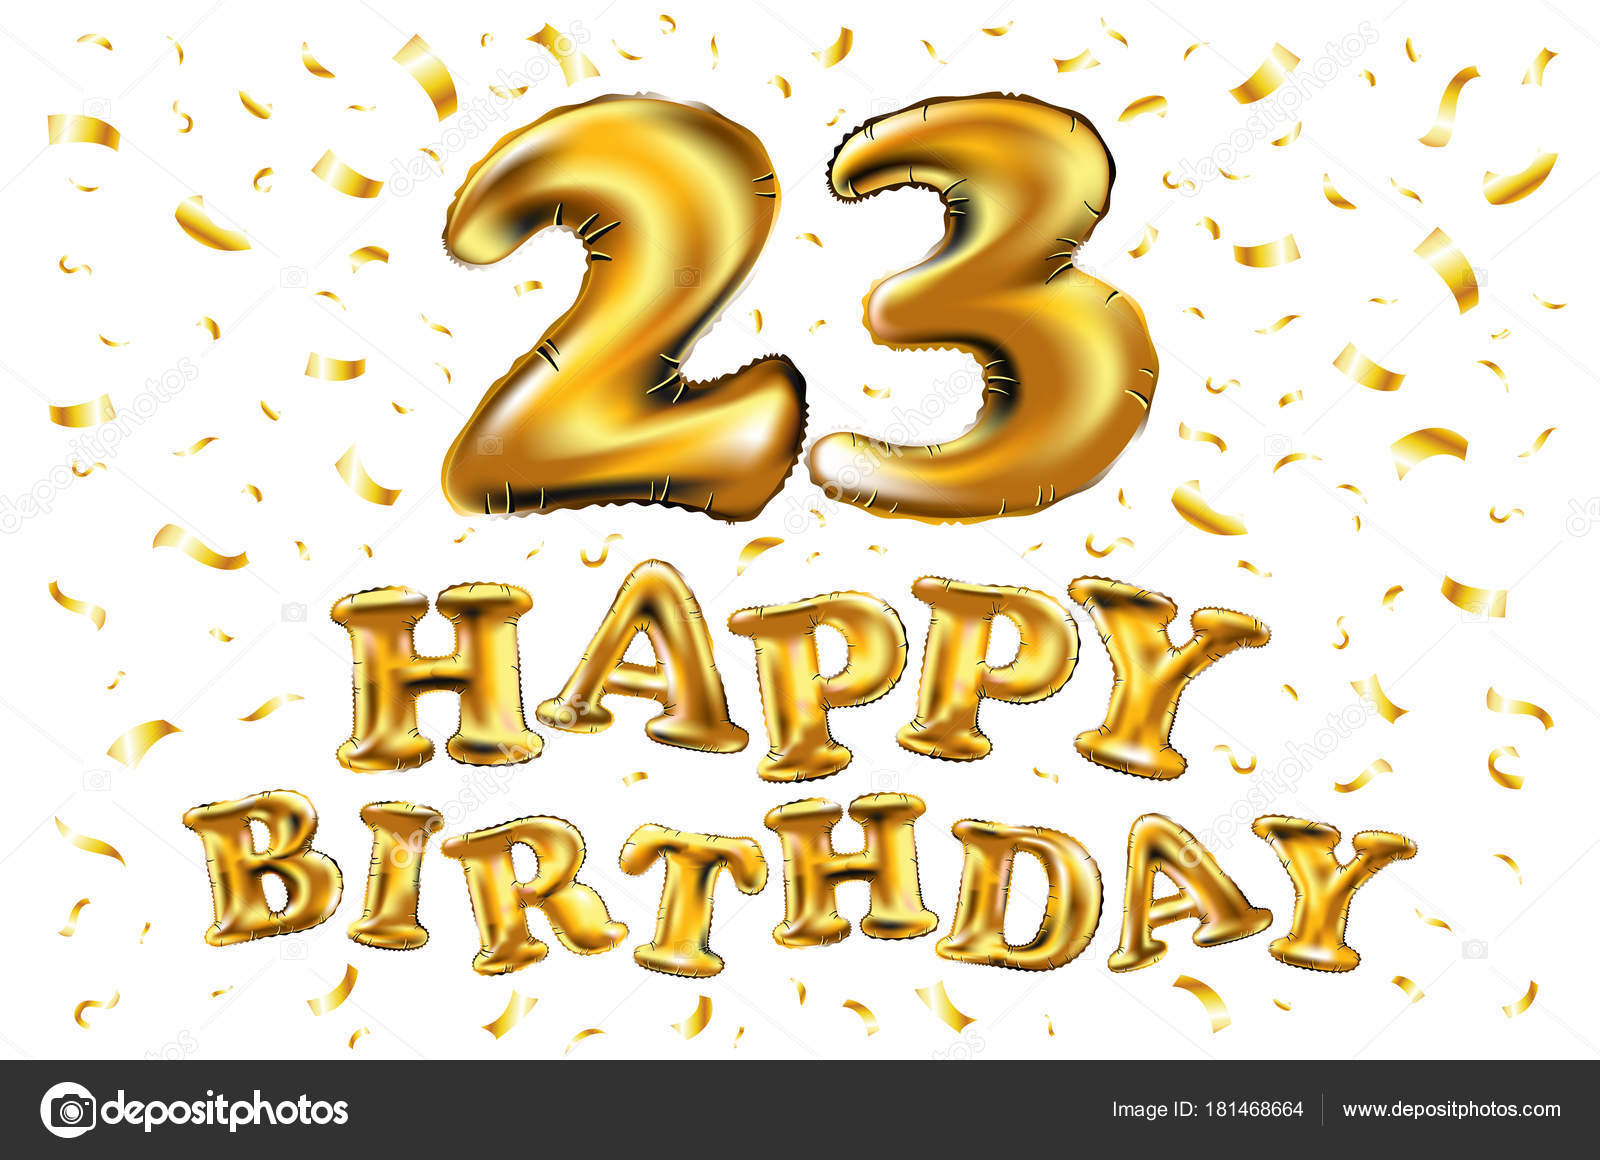 23rd Birthday Celebration With Gold Balloons And Colorful Confetti Glitters 3d Illustration Design For Your Greeting Card Birthday Invitation And Celebration Party Of Twenty Three Years Anniversary Vector Image By C